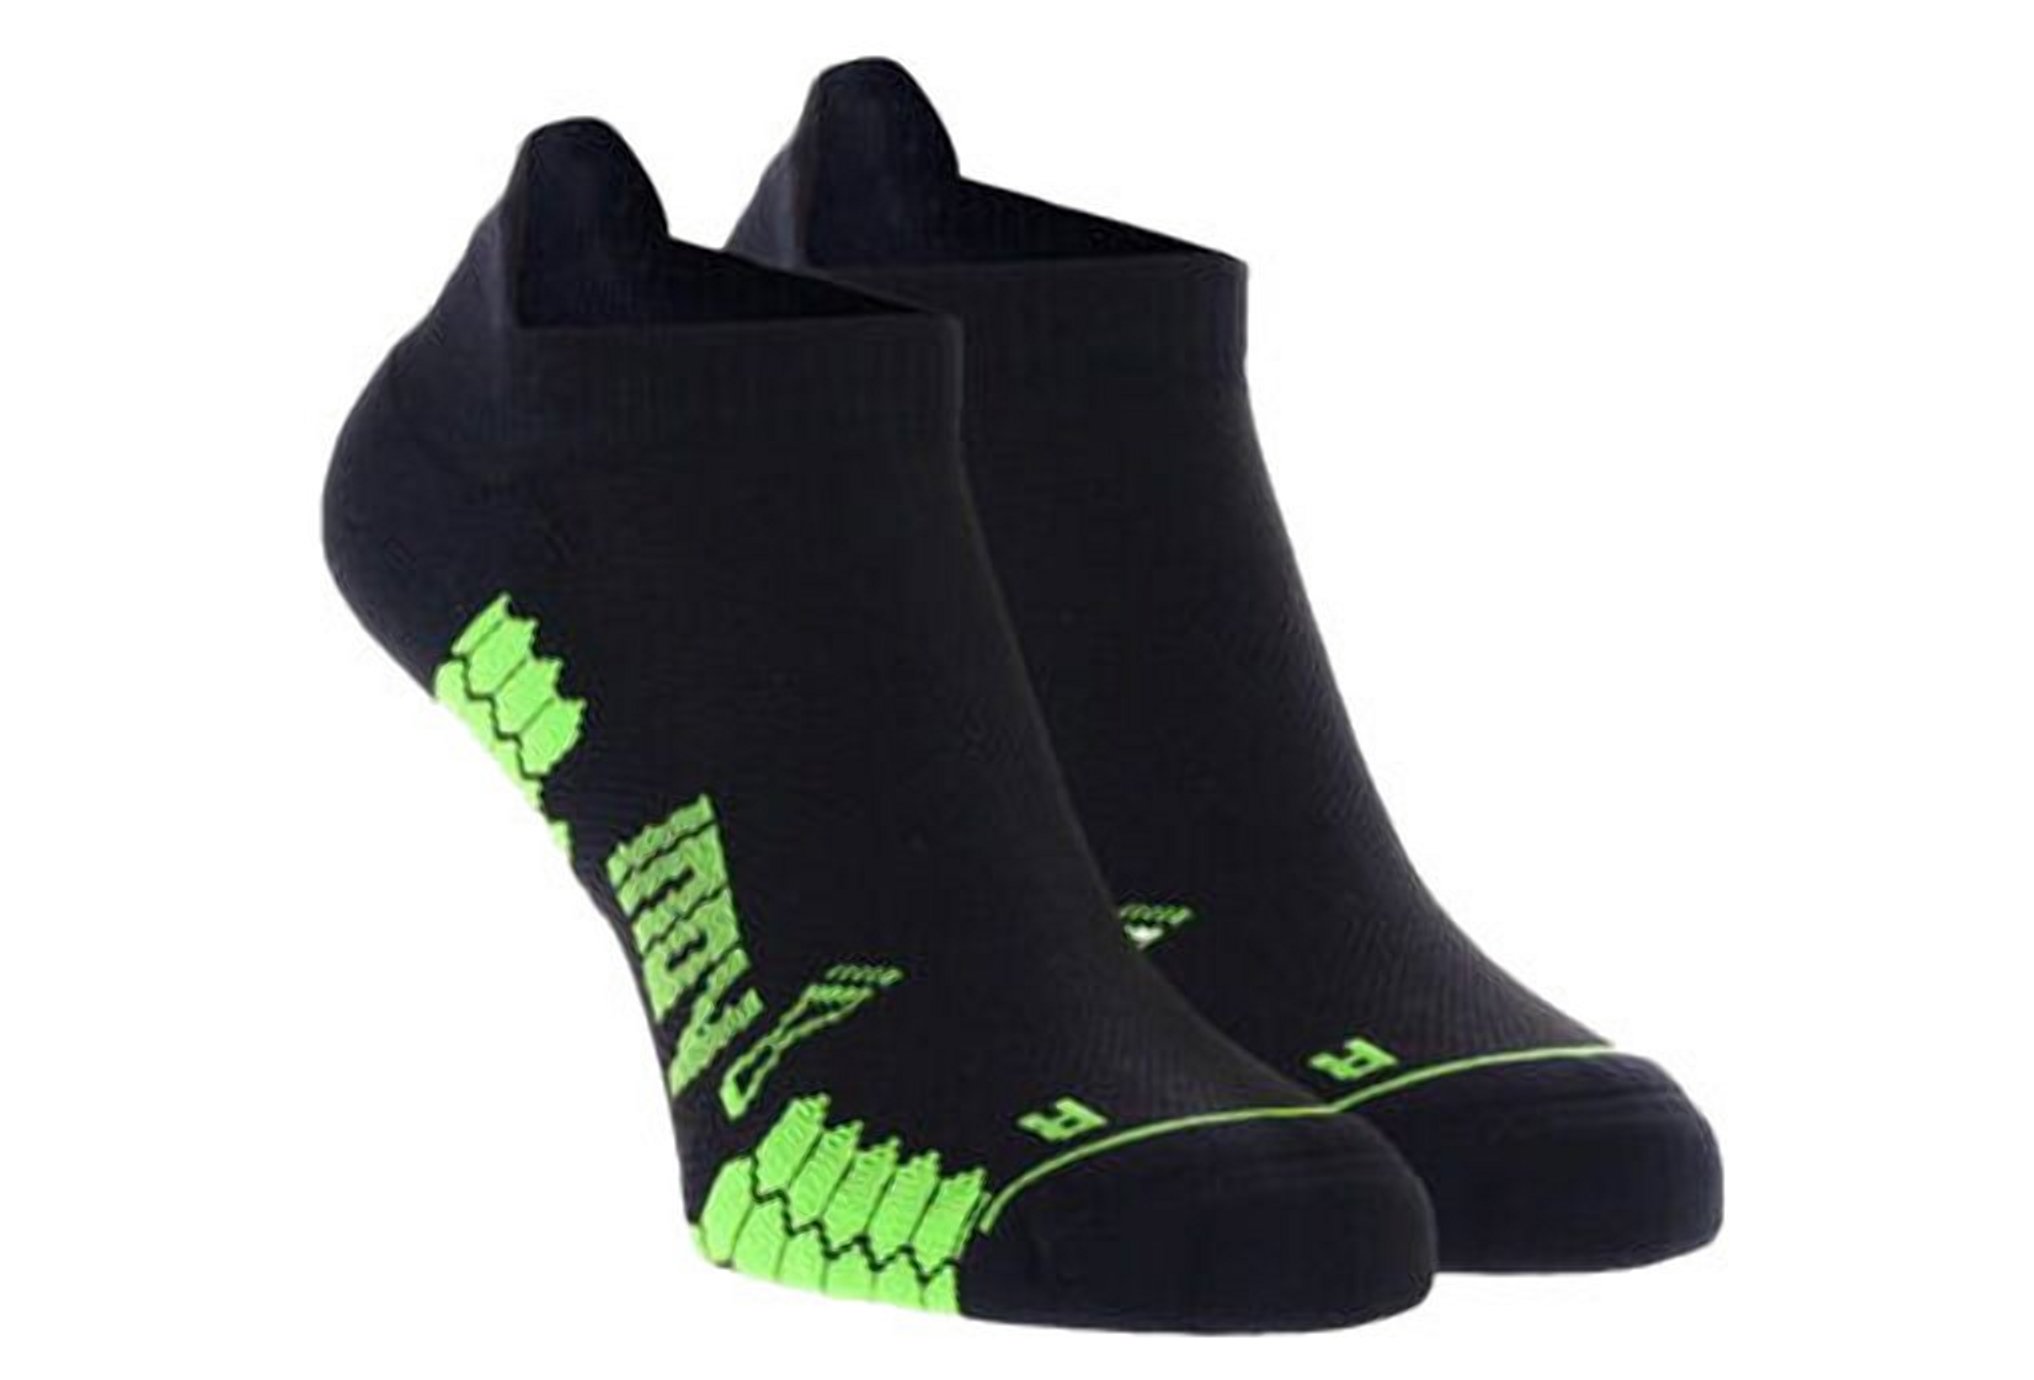 Inov-8 2 paires TrailFly Low Chaussettes